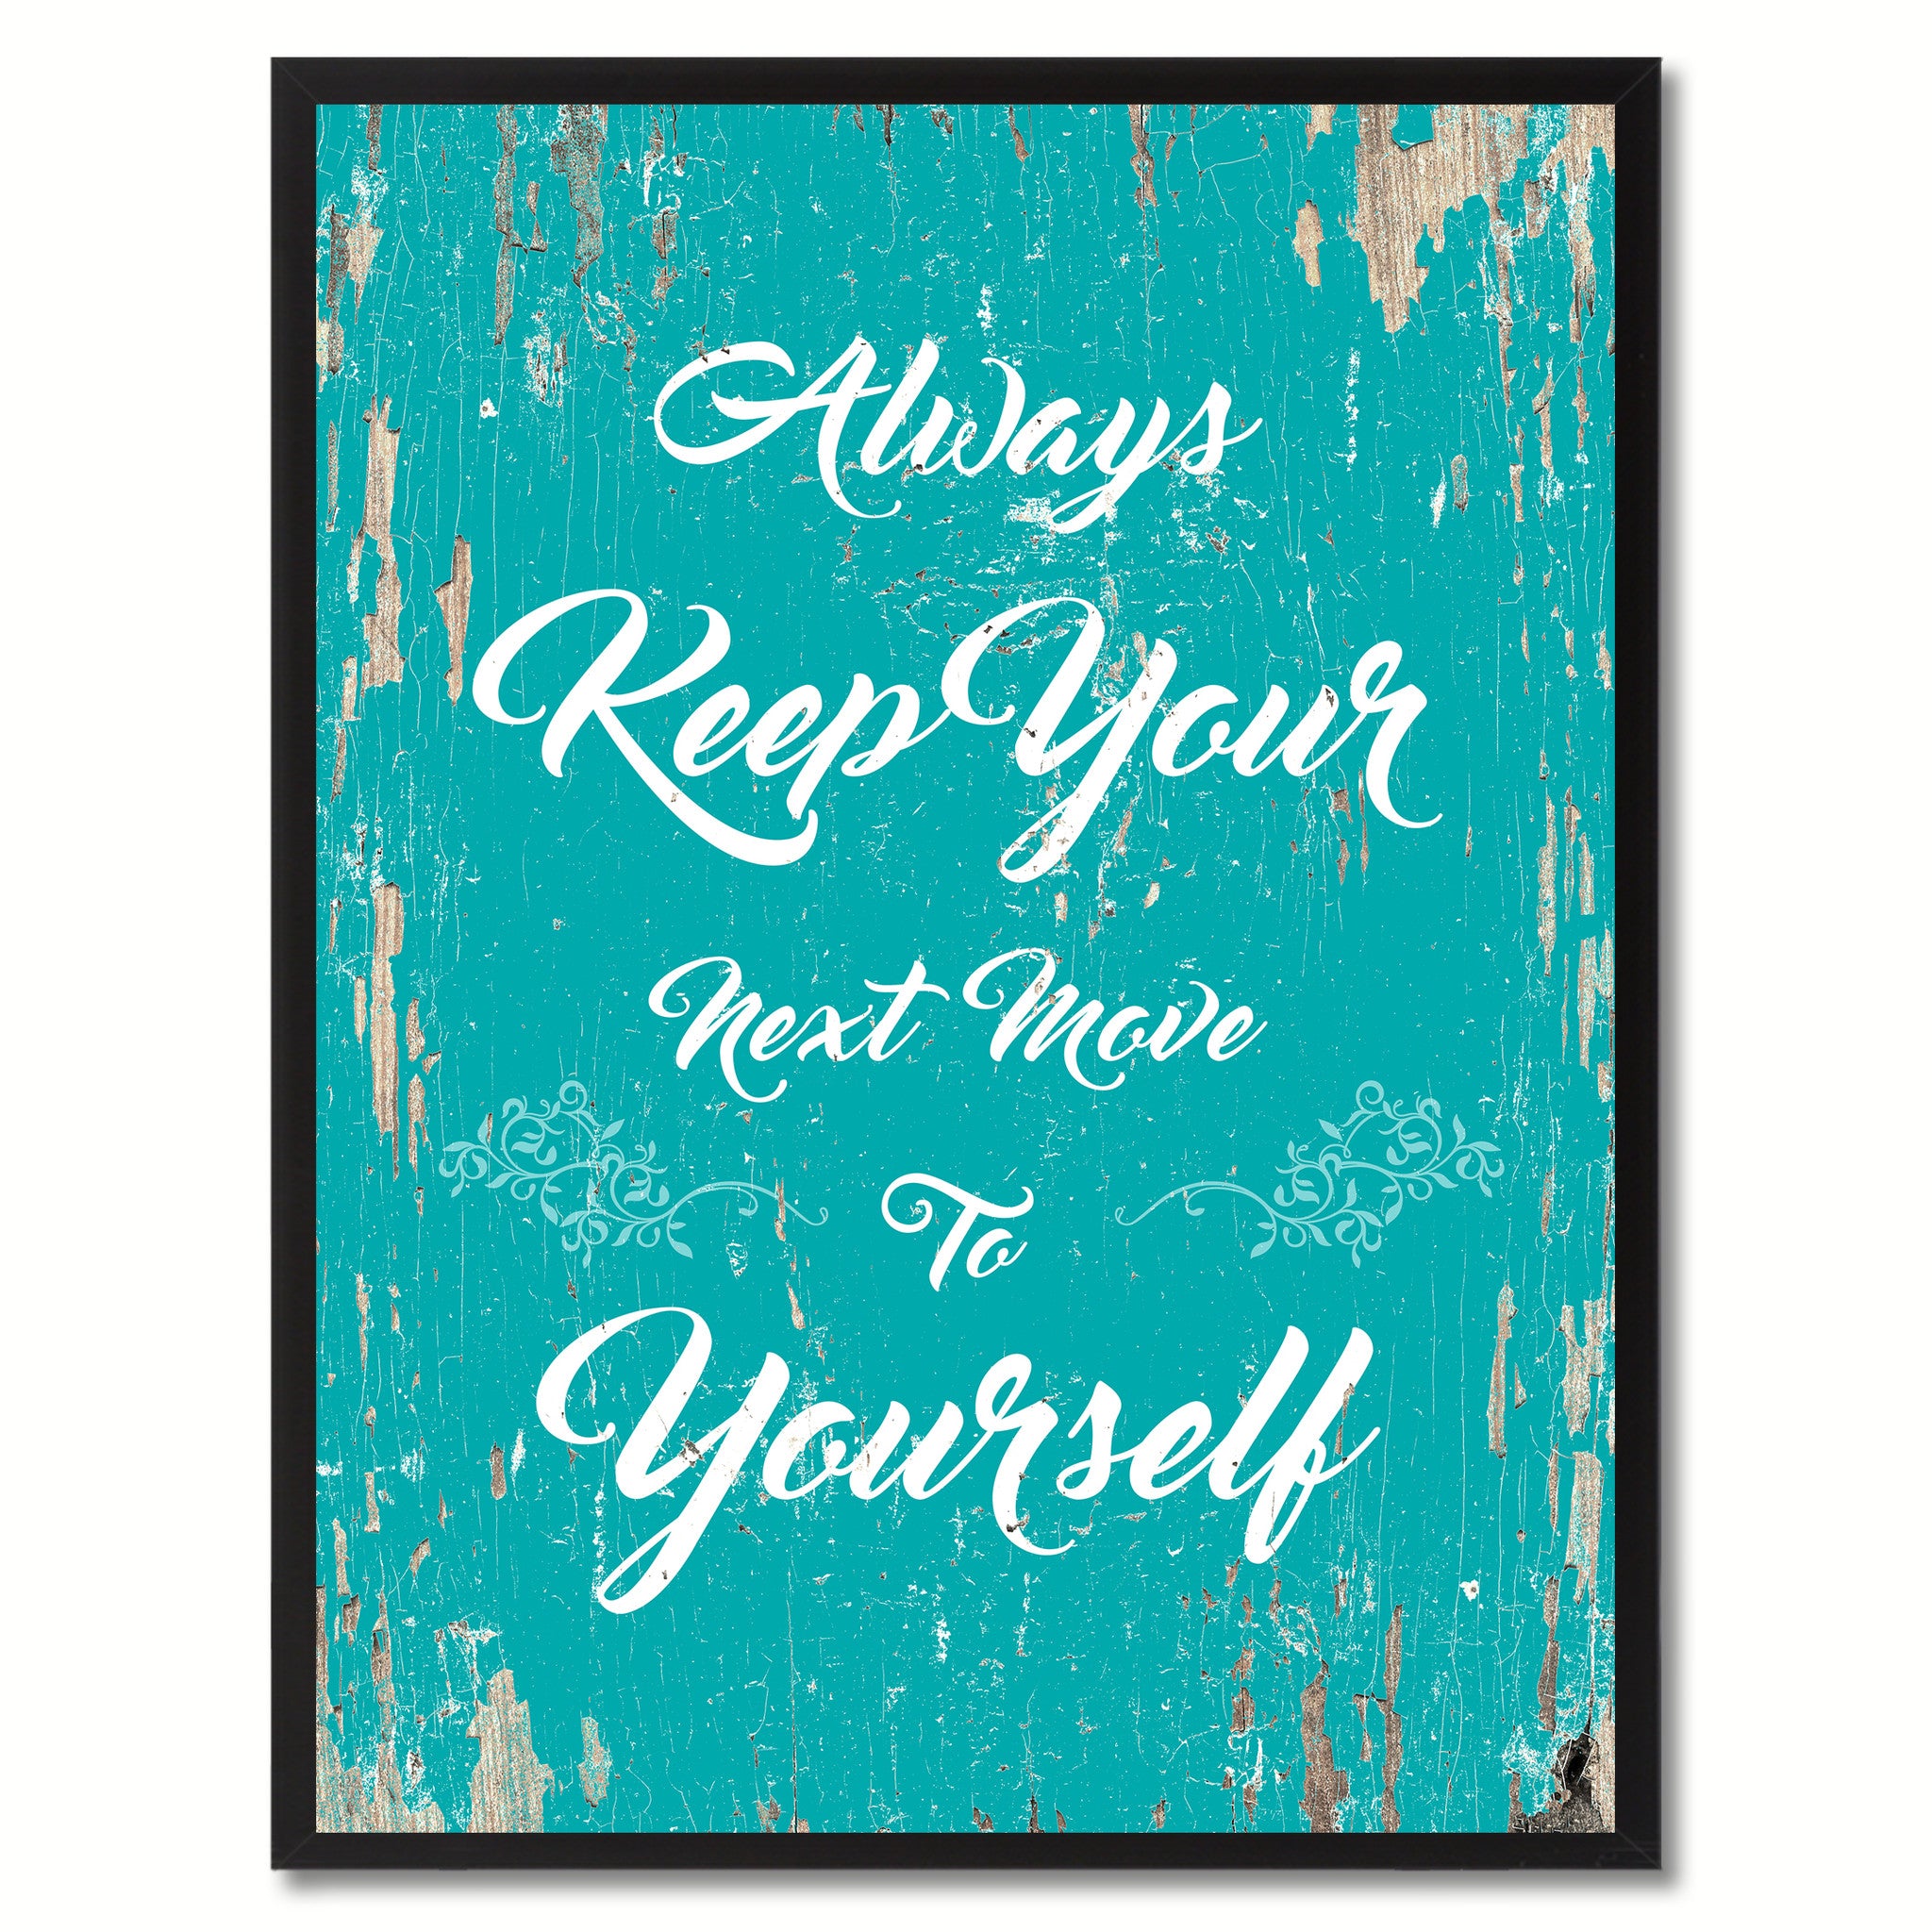 Always keep your next move to yourself Motivation Quote Saying Gift Ideas Home Decor Wall Art